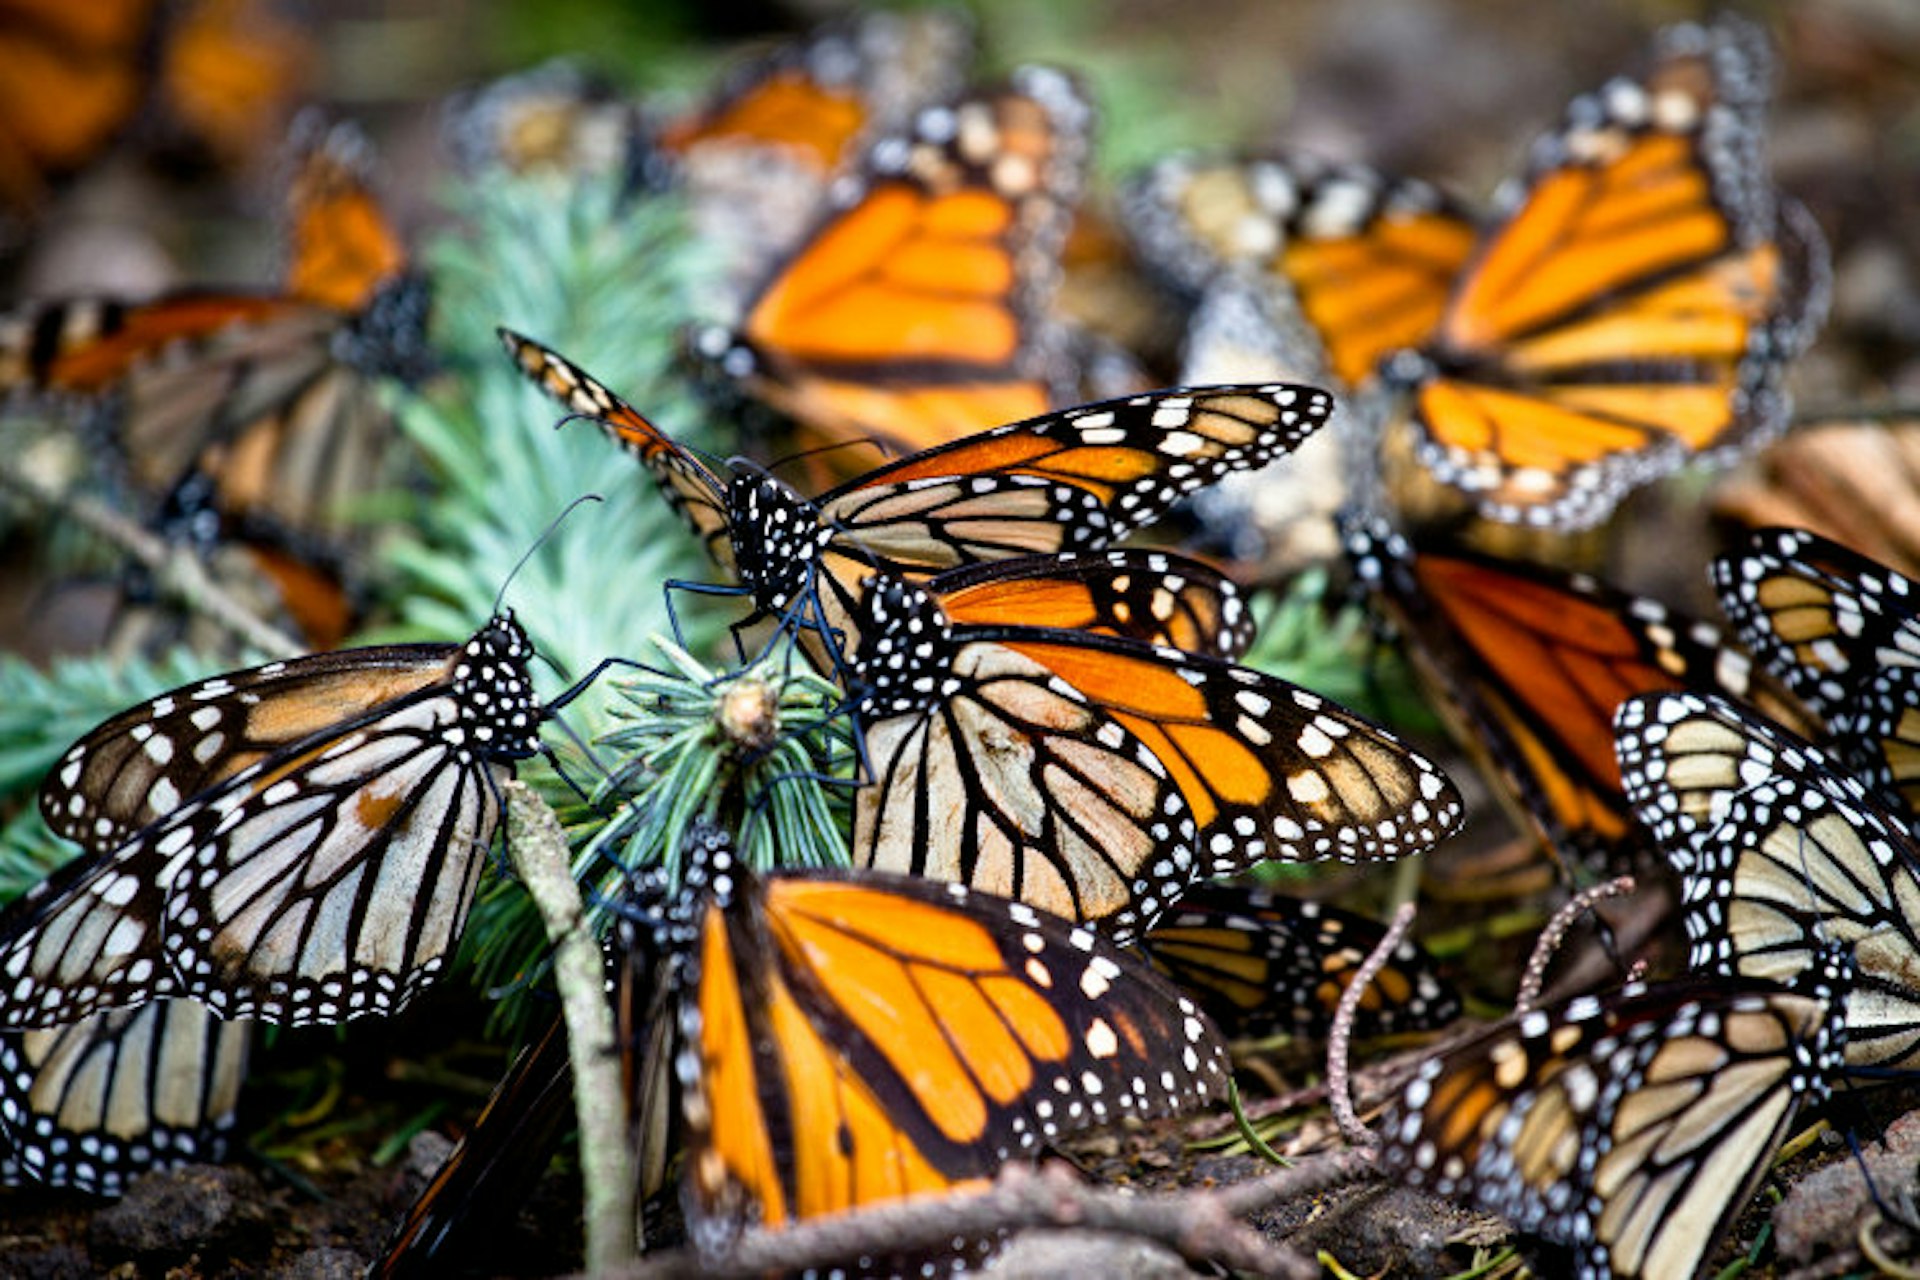 Monarch butterflies at rest. Image by Stuart Butler / Lonely Planet